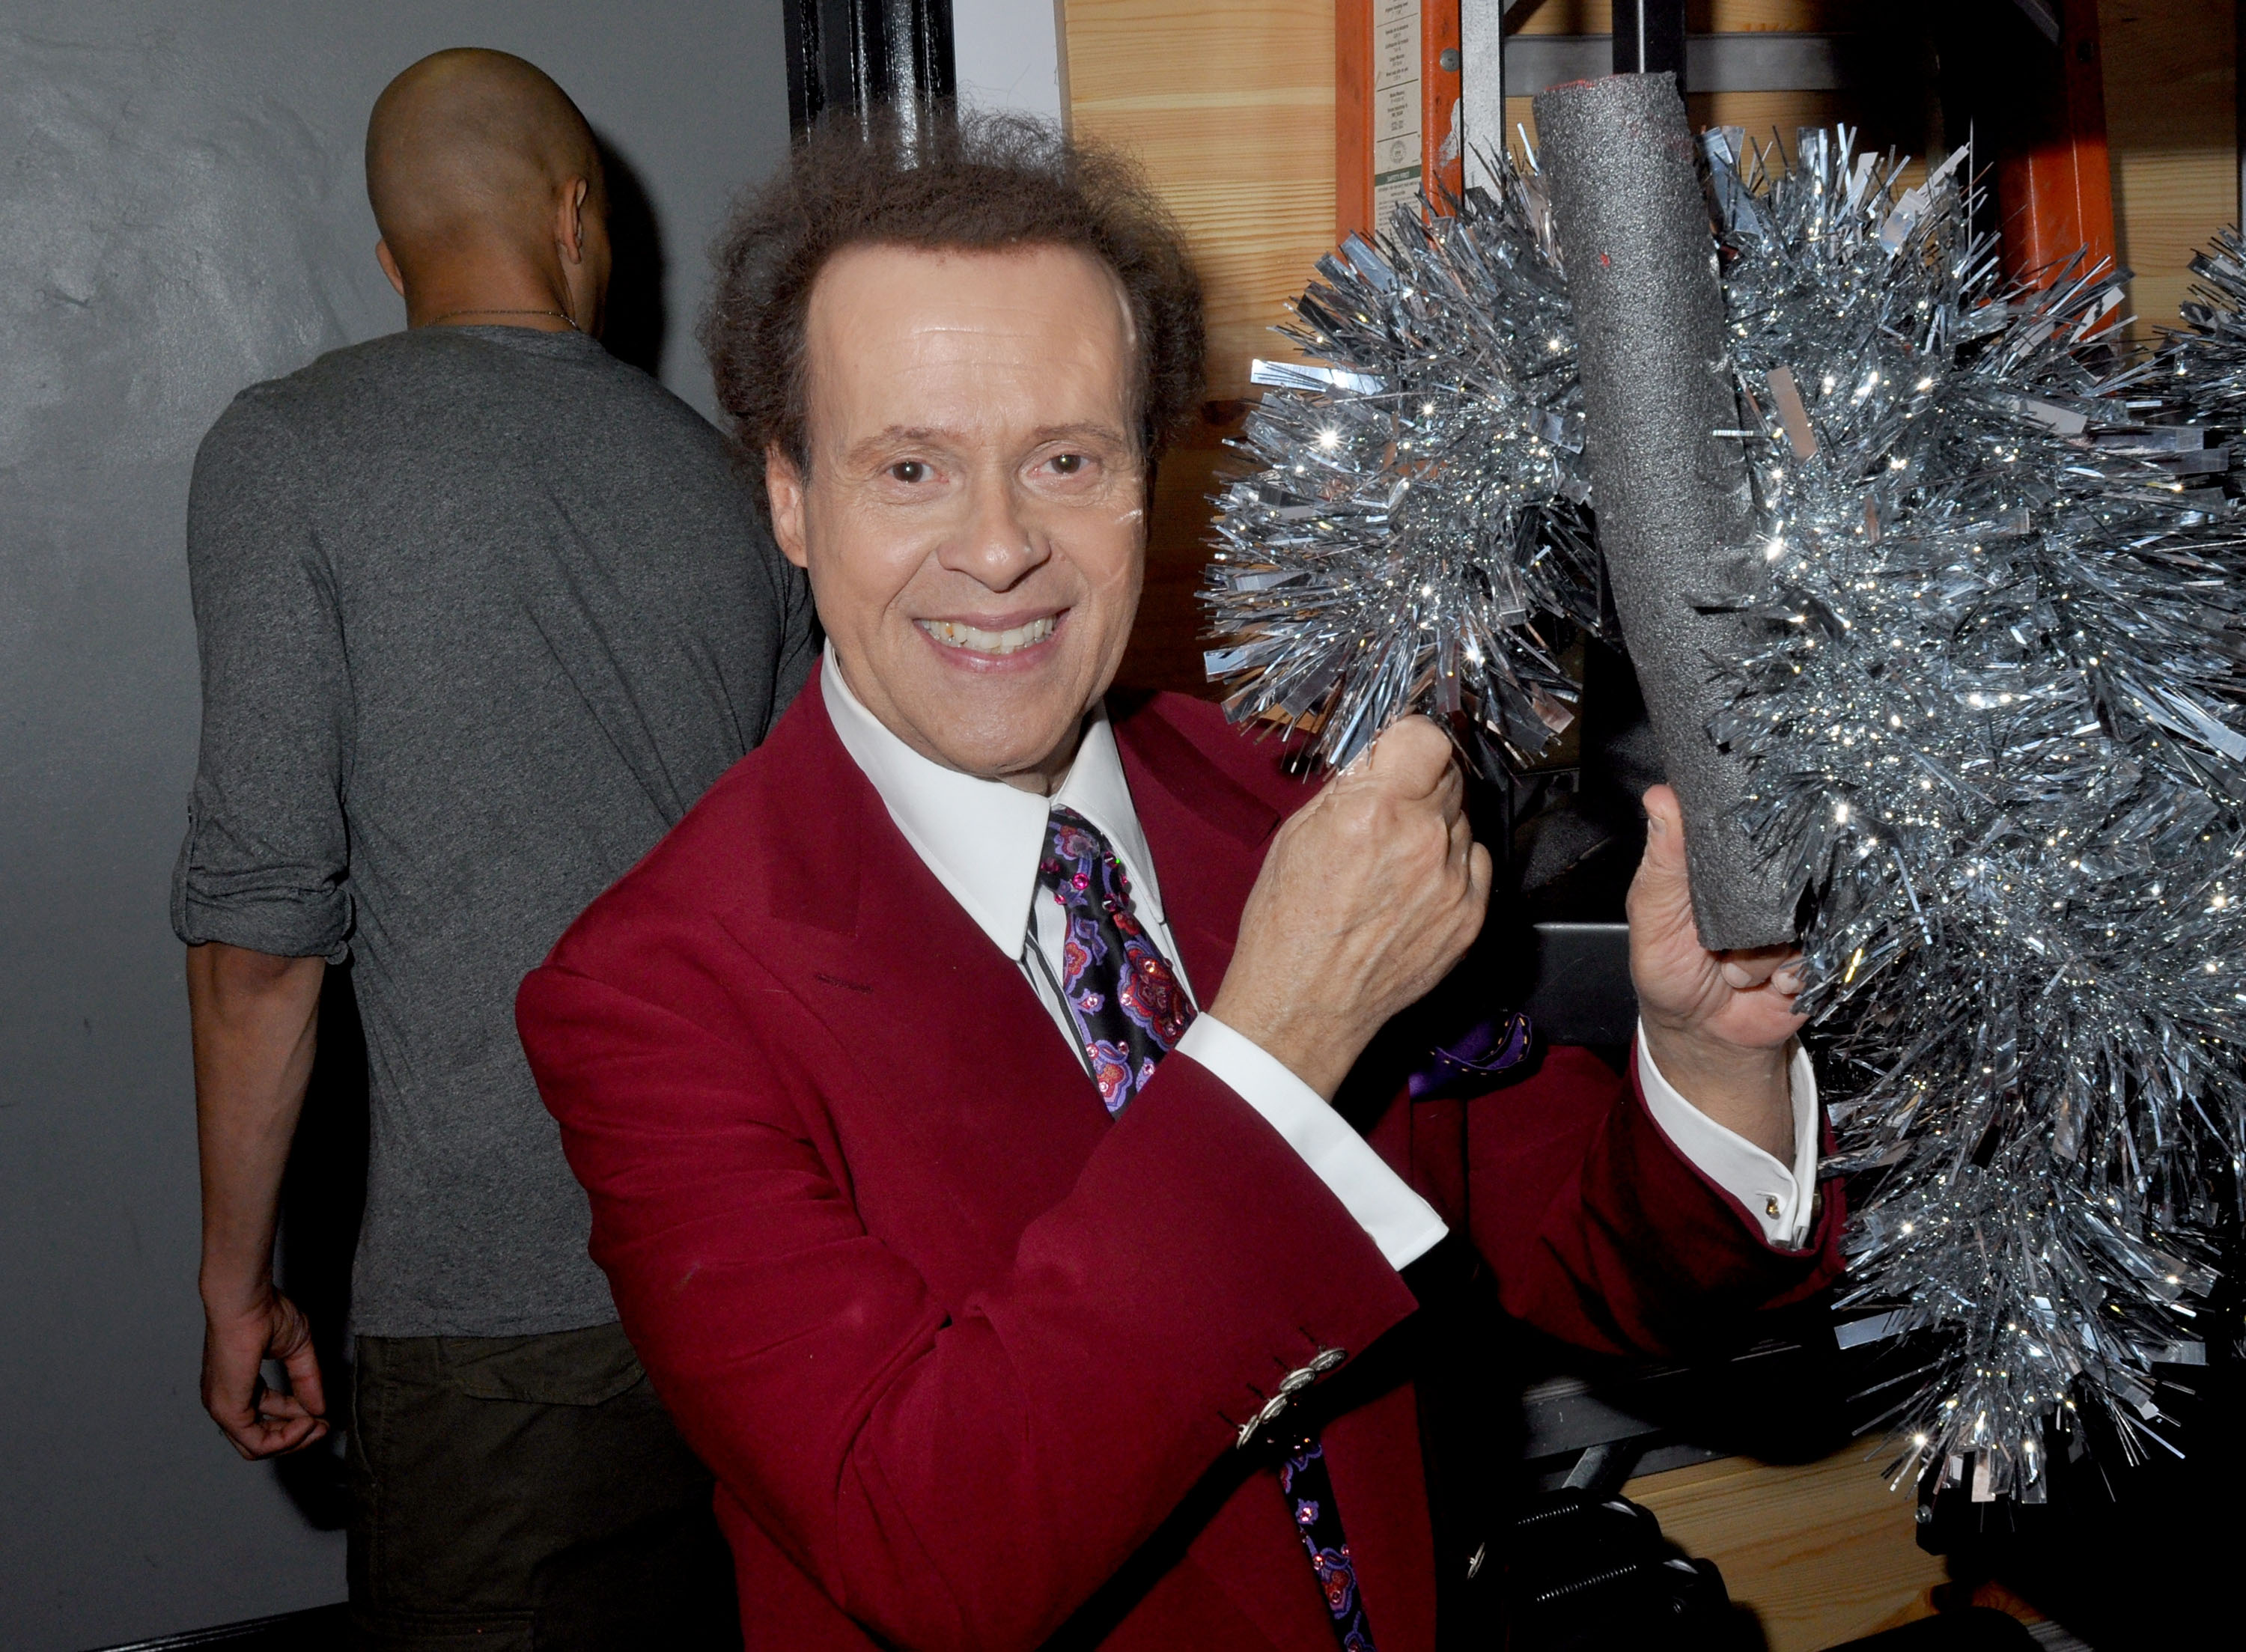 Richard Simmons at ACME Comedy Theatre on December 13, 2013, in Los Angeles, California | Source: Getty Images